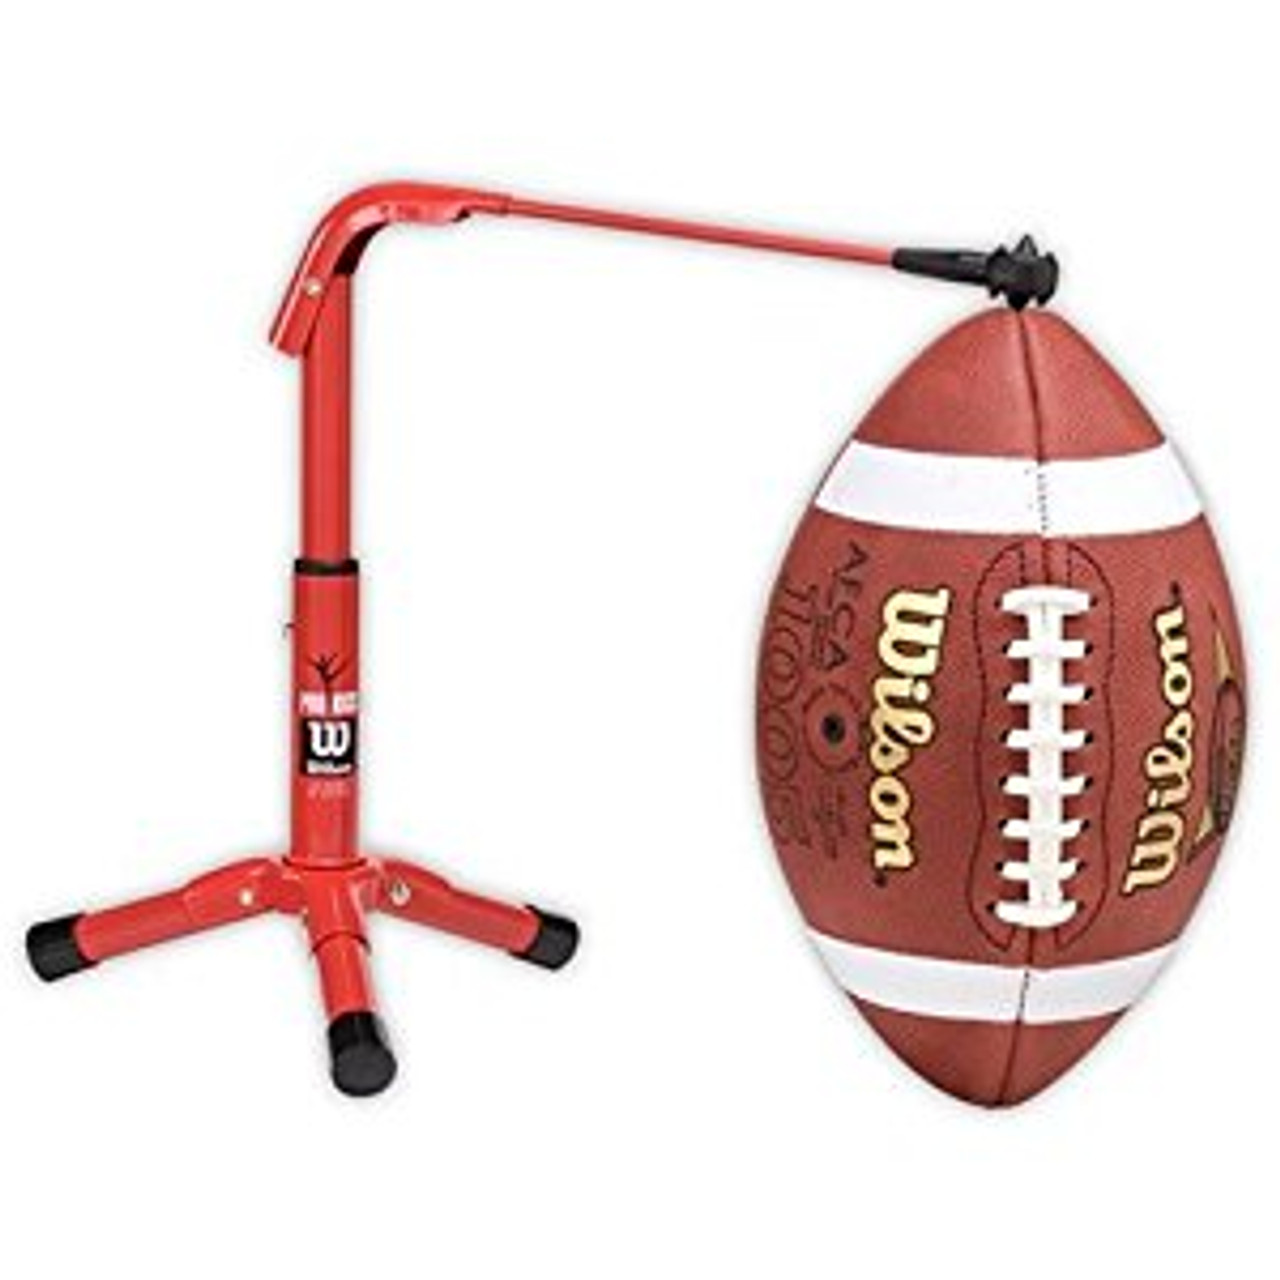 Wilson NFL Tailgate Time Football with Pump and Tee, Junior Size